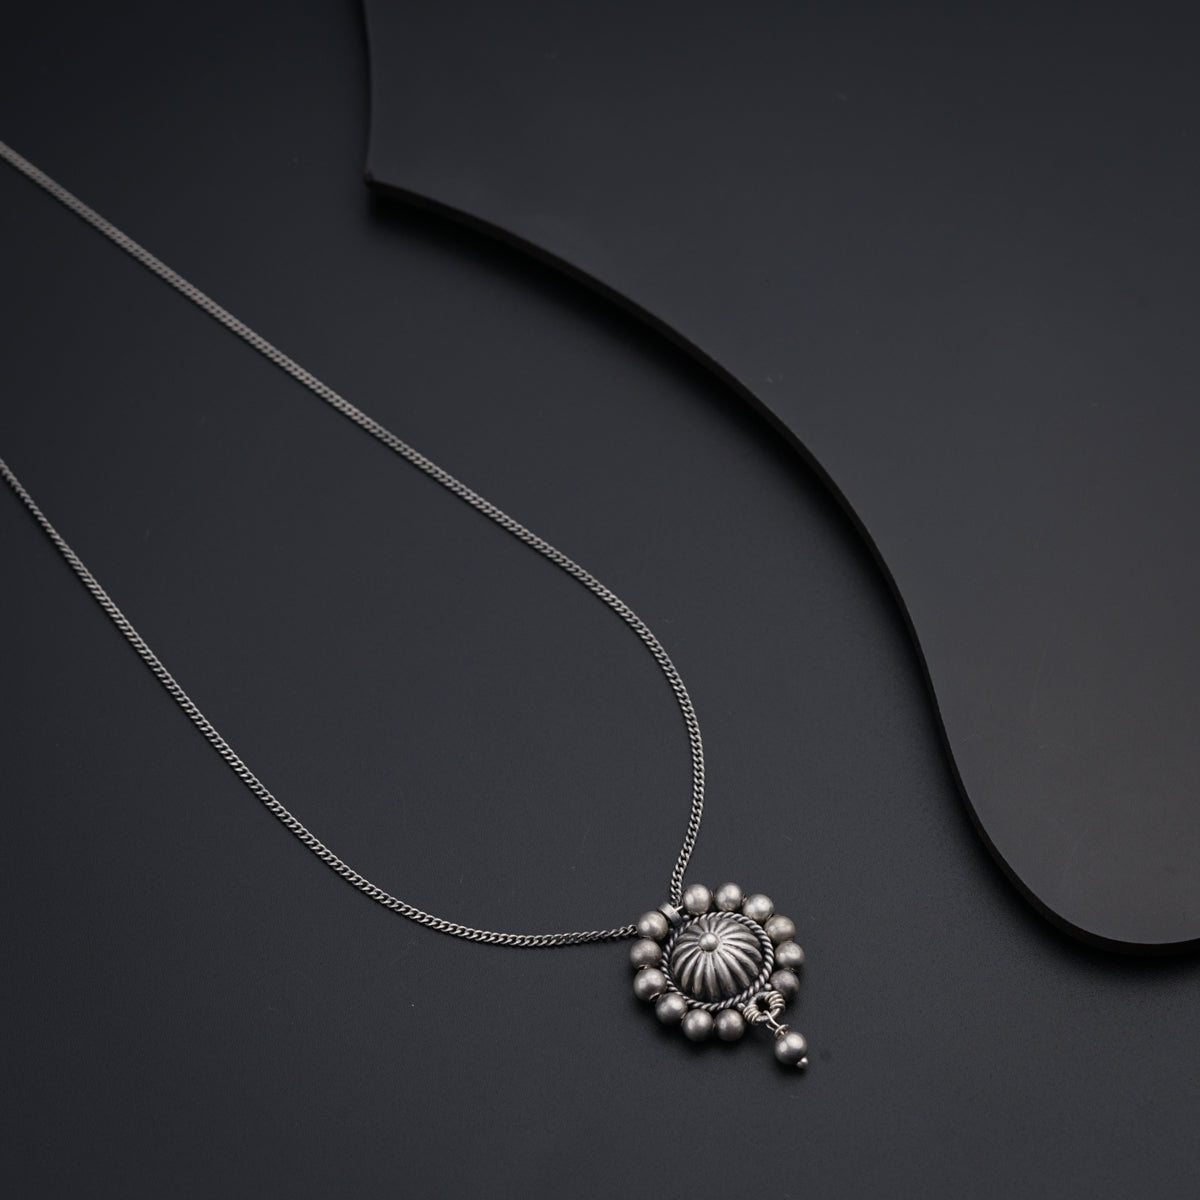 a silver necklace on a black surface